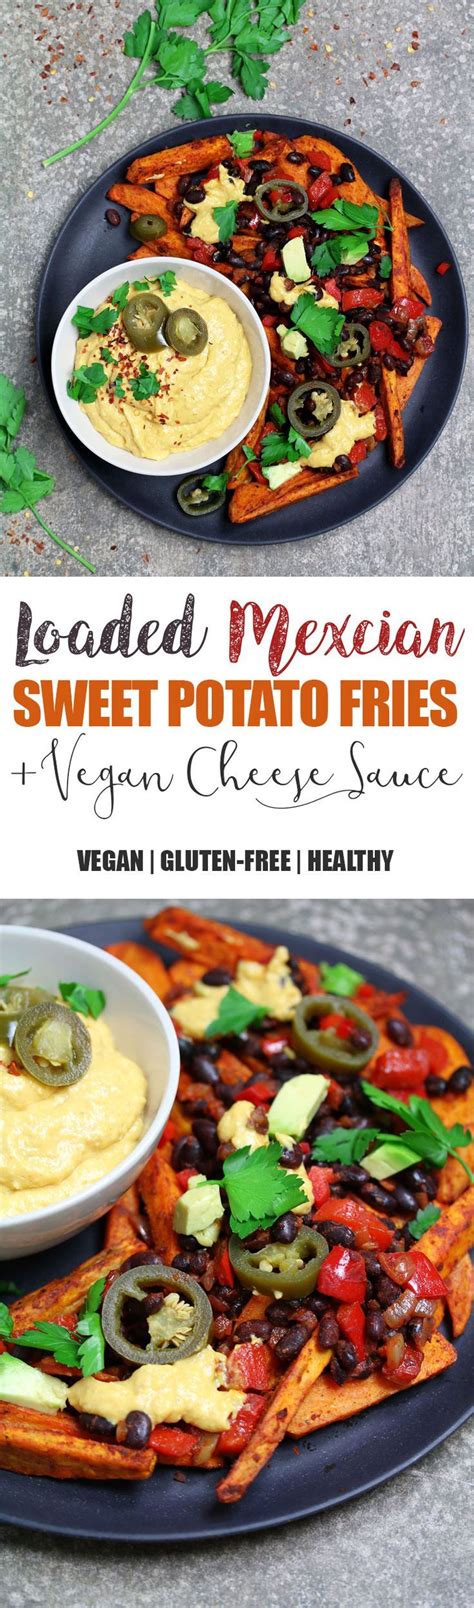 Loaded Mexican Sweet Potato Fries With A Vegan Cheese Sauce Uk Health